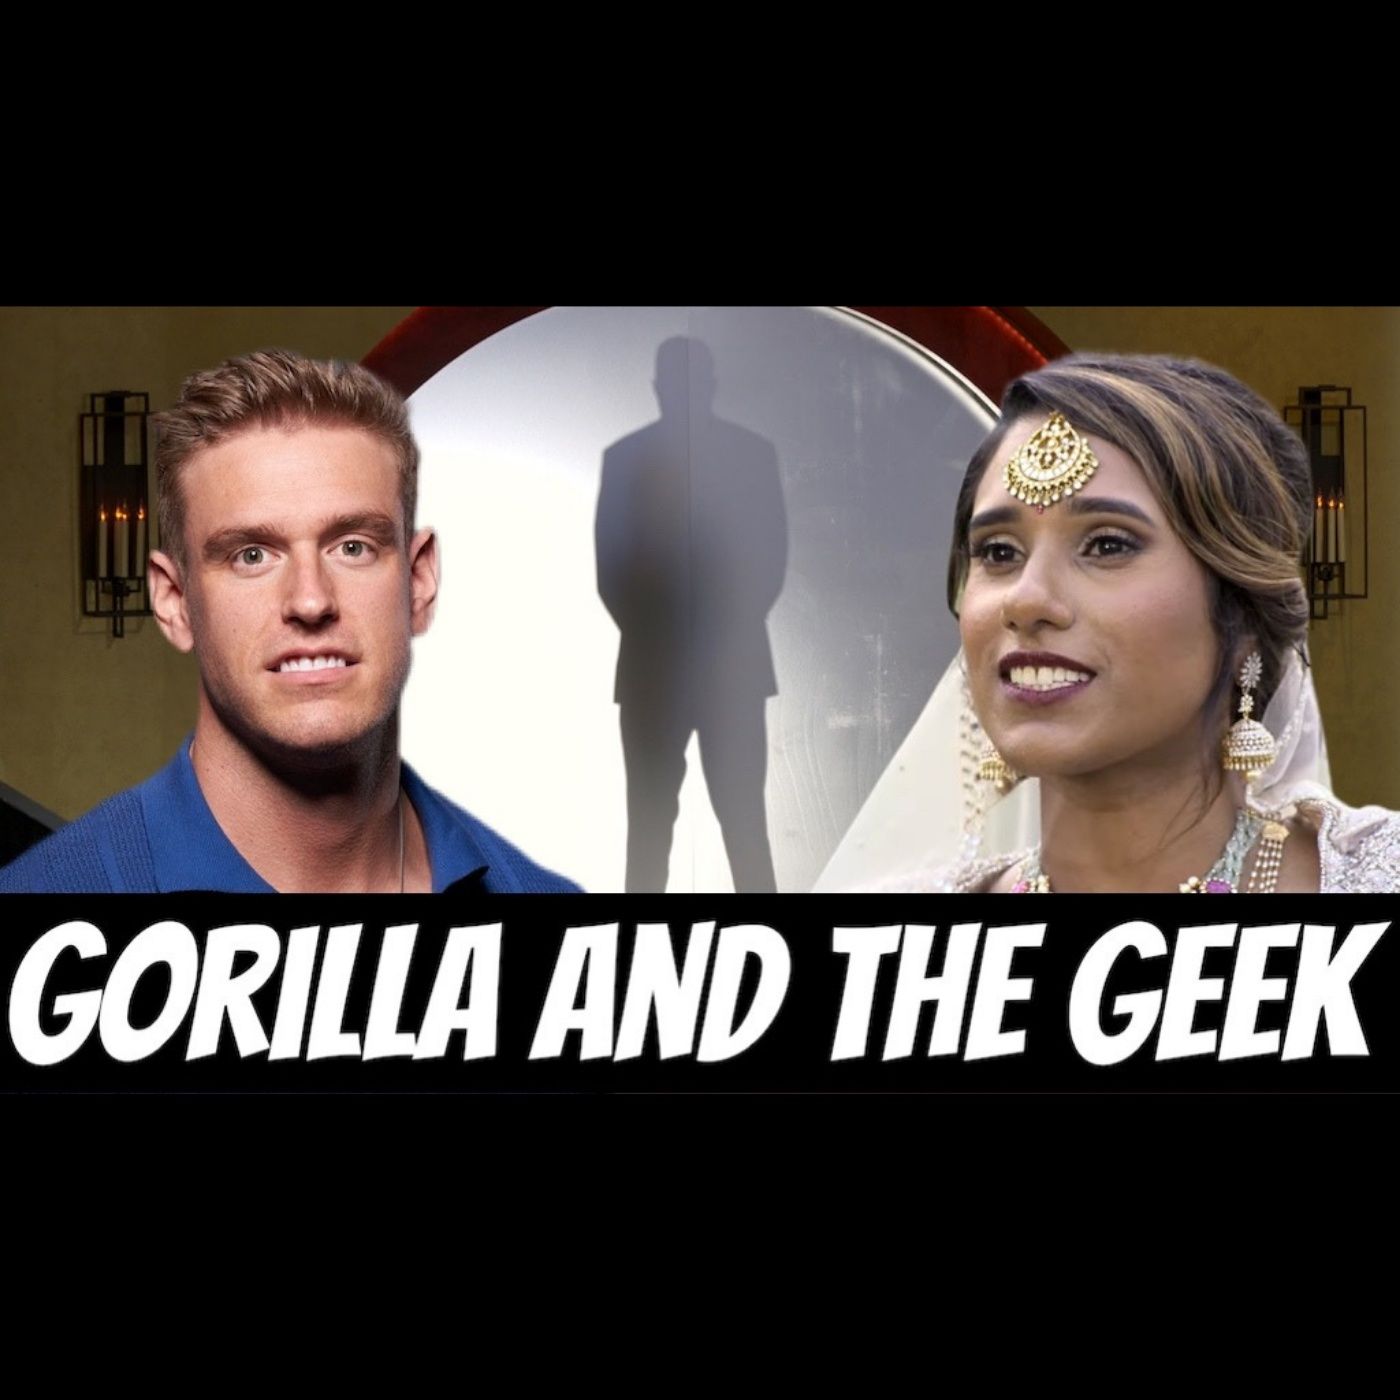 Love is Blind Season 2 Discussion - Gorilla and The Geek Episode 46